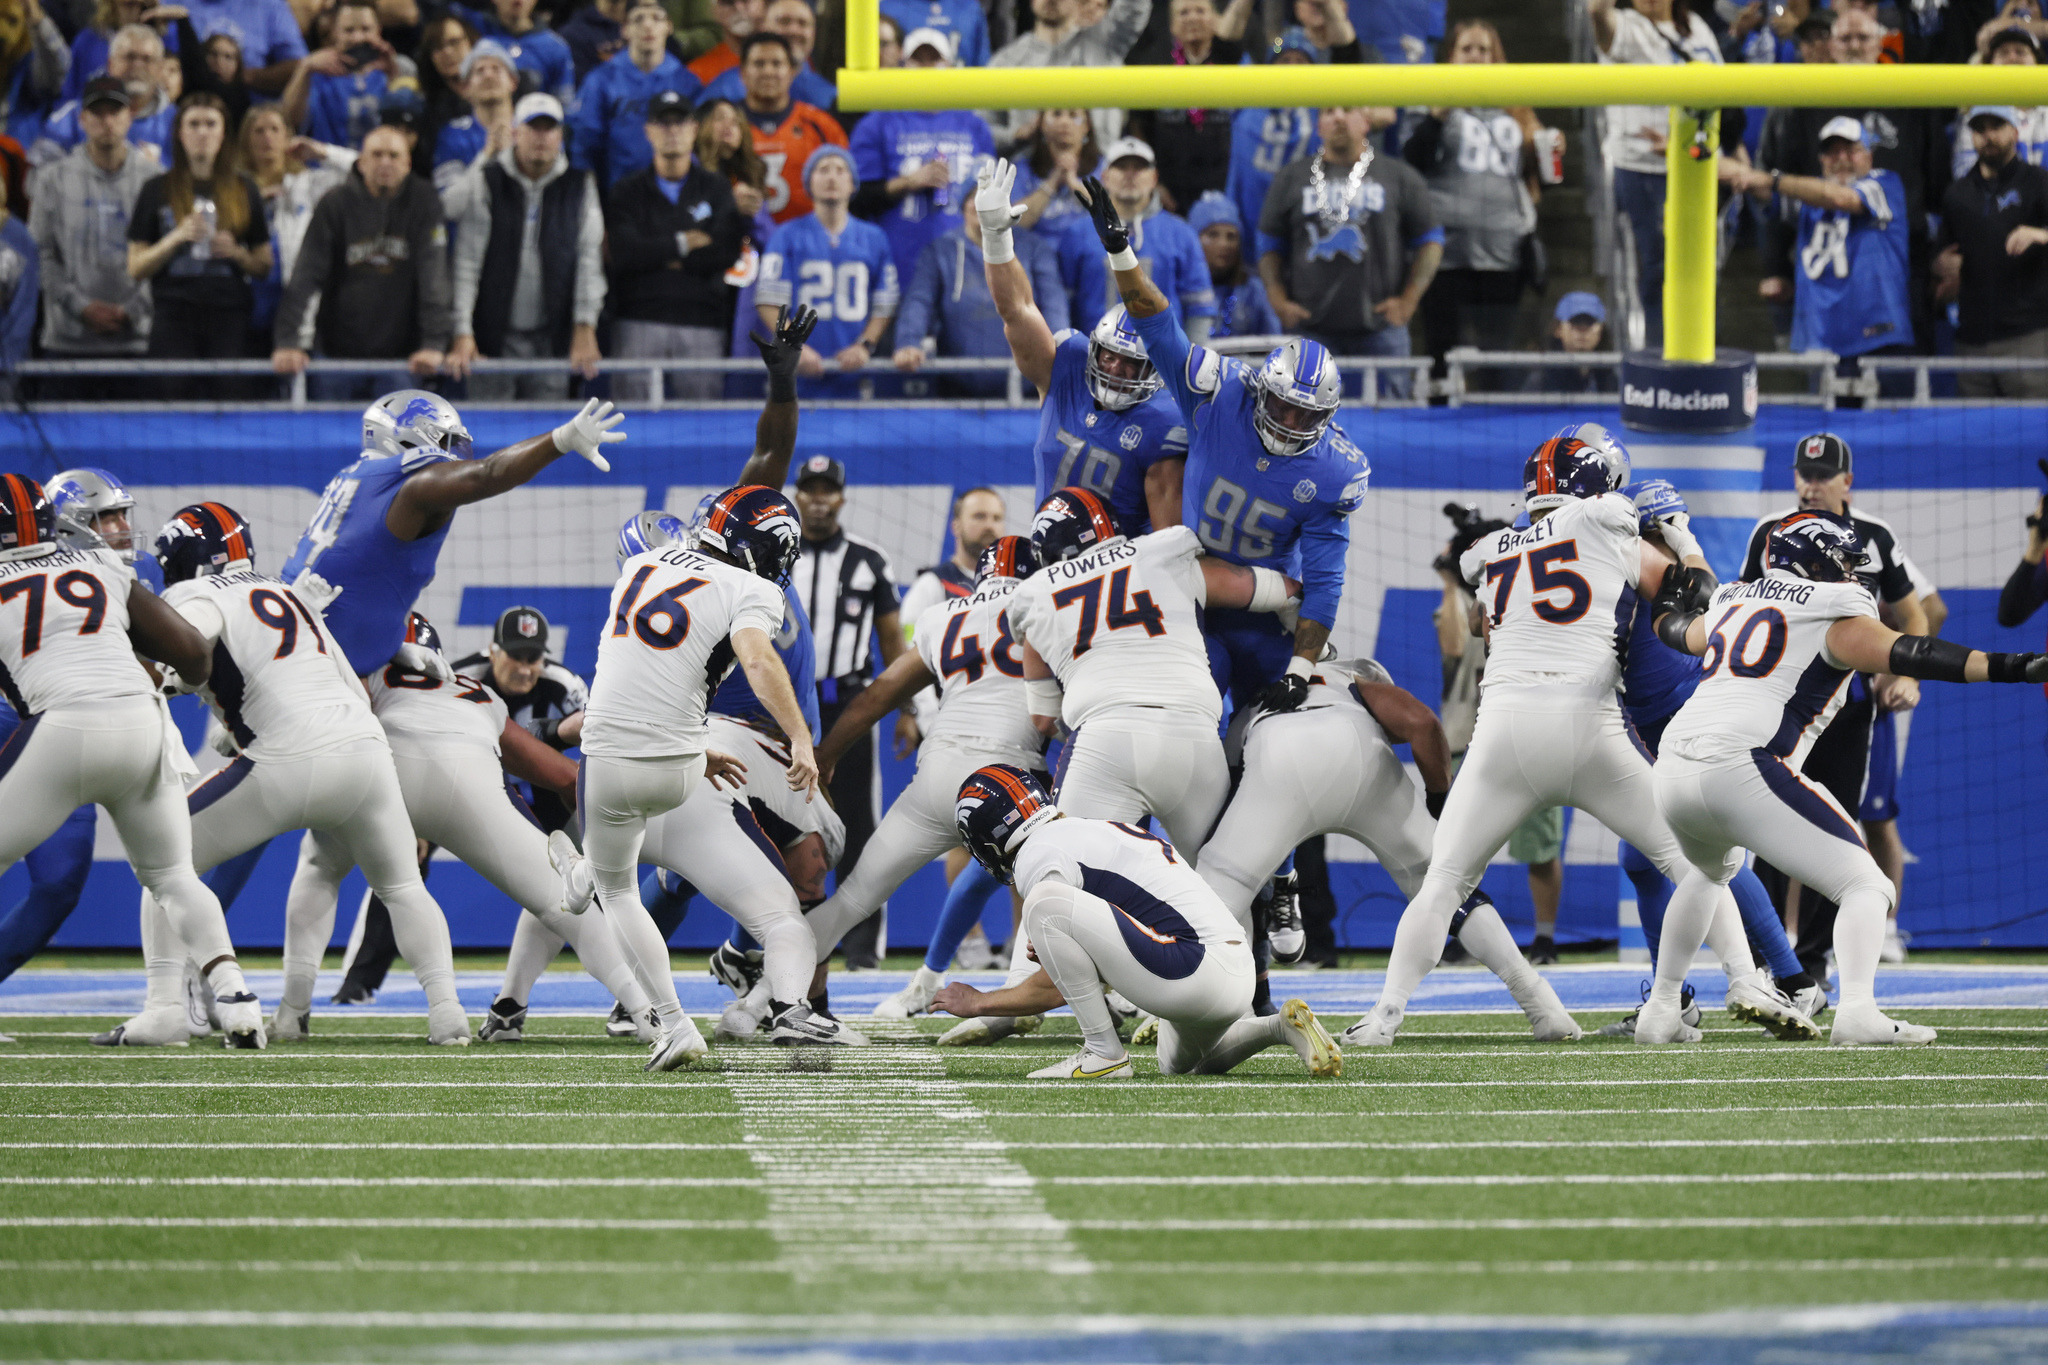 Denver Broncos place-kicker Wil Lutz (16) kicks a field goal during the second half of an NFL football game against the Detroit Lions